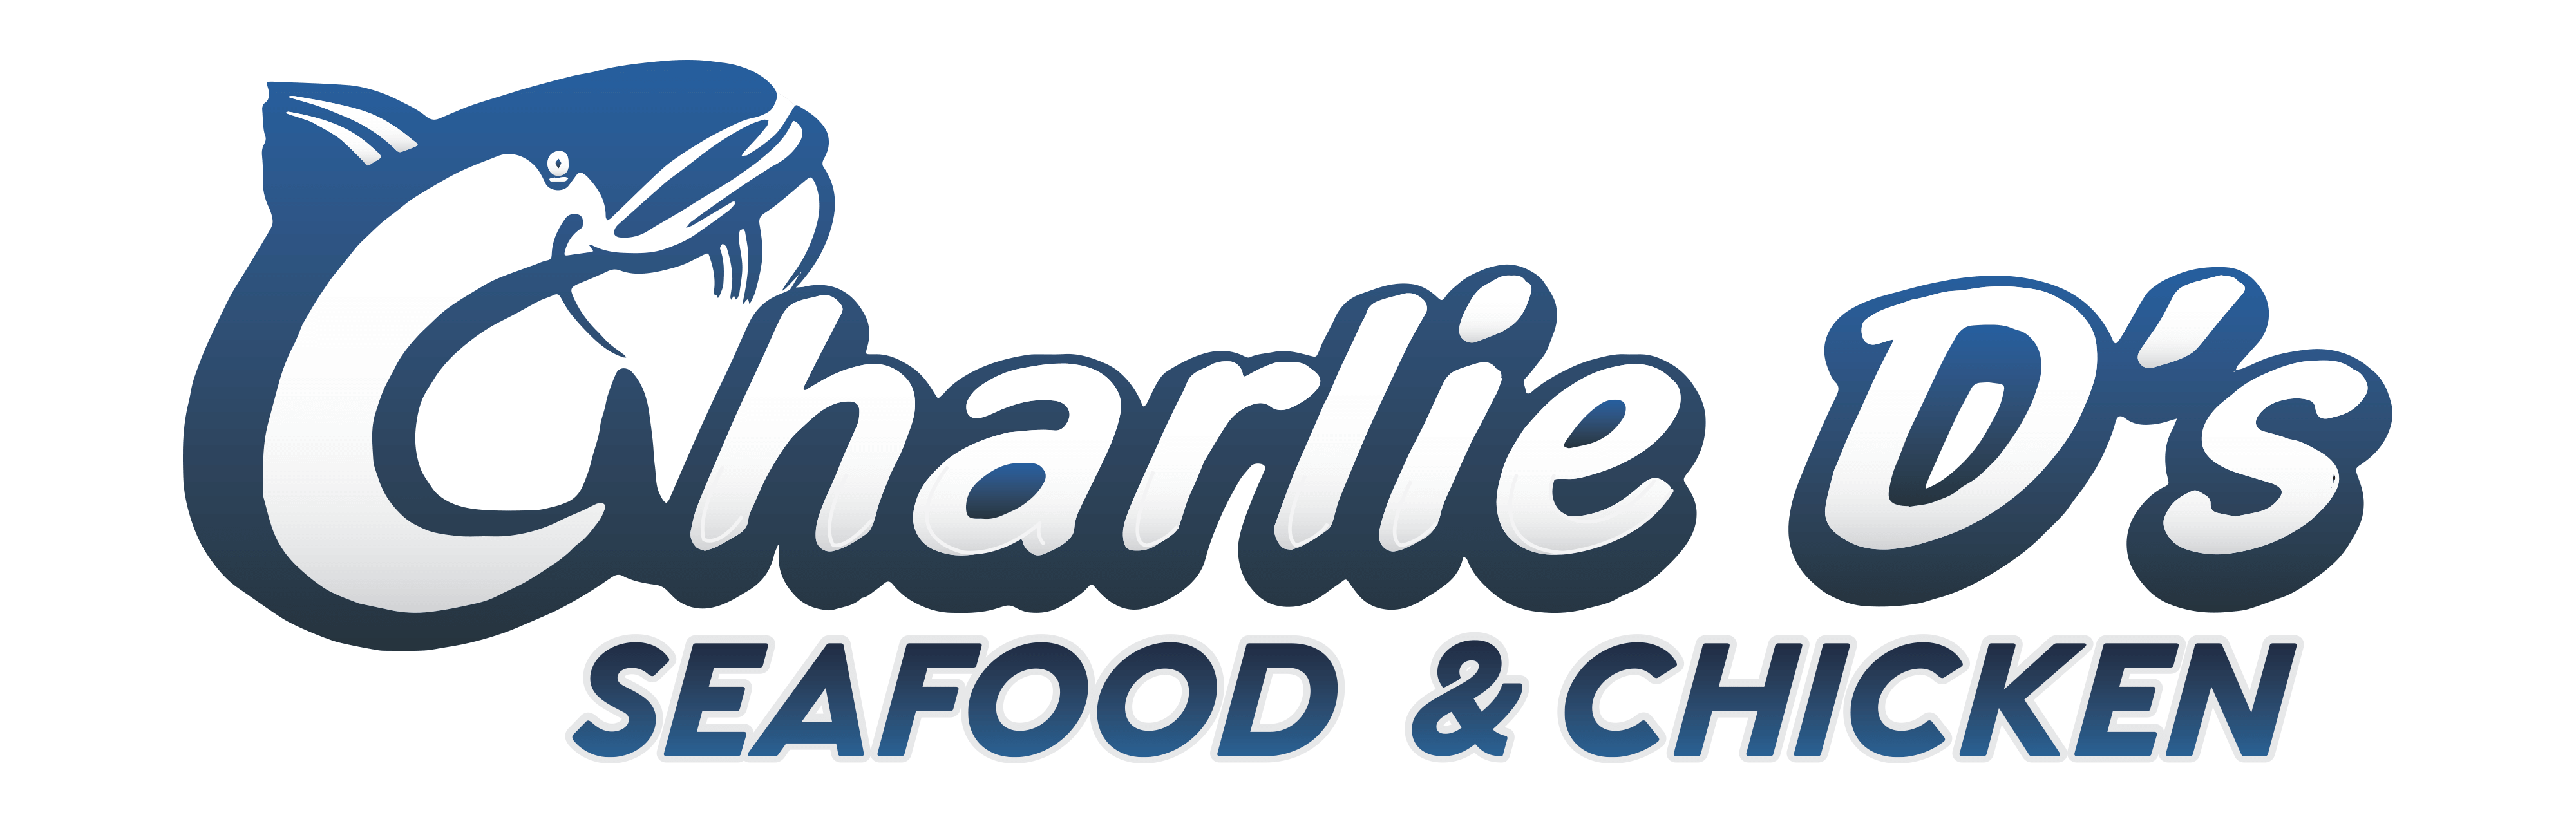 Charlie D's Seafood and Chicken logo top